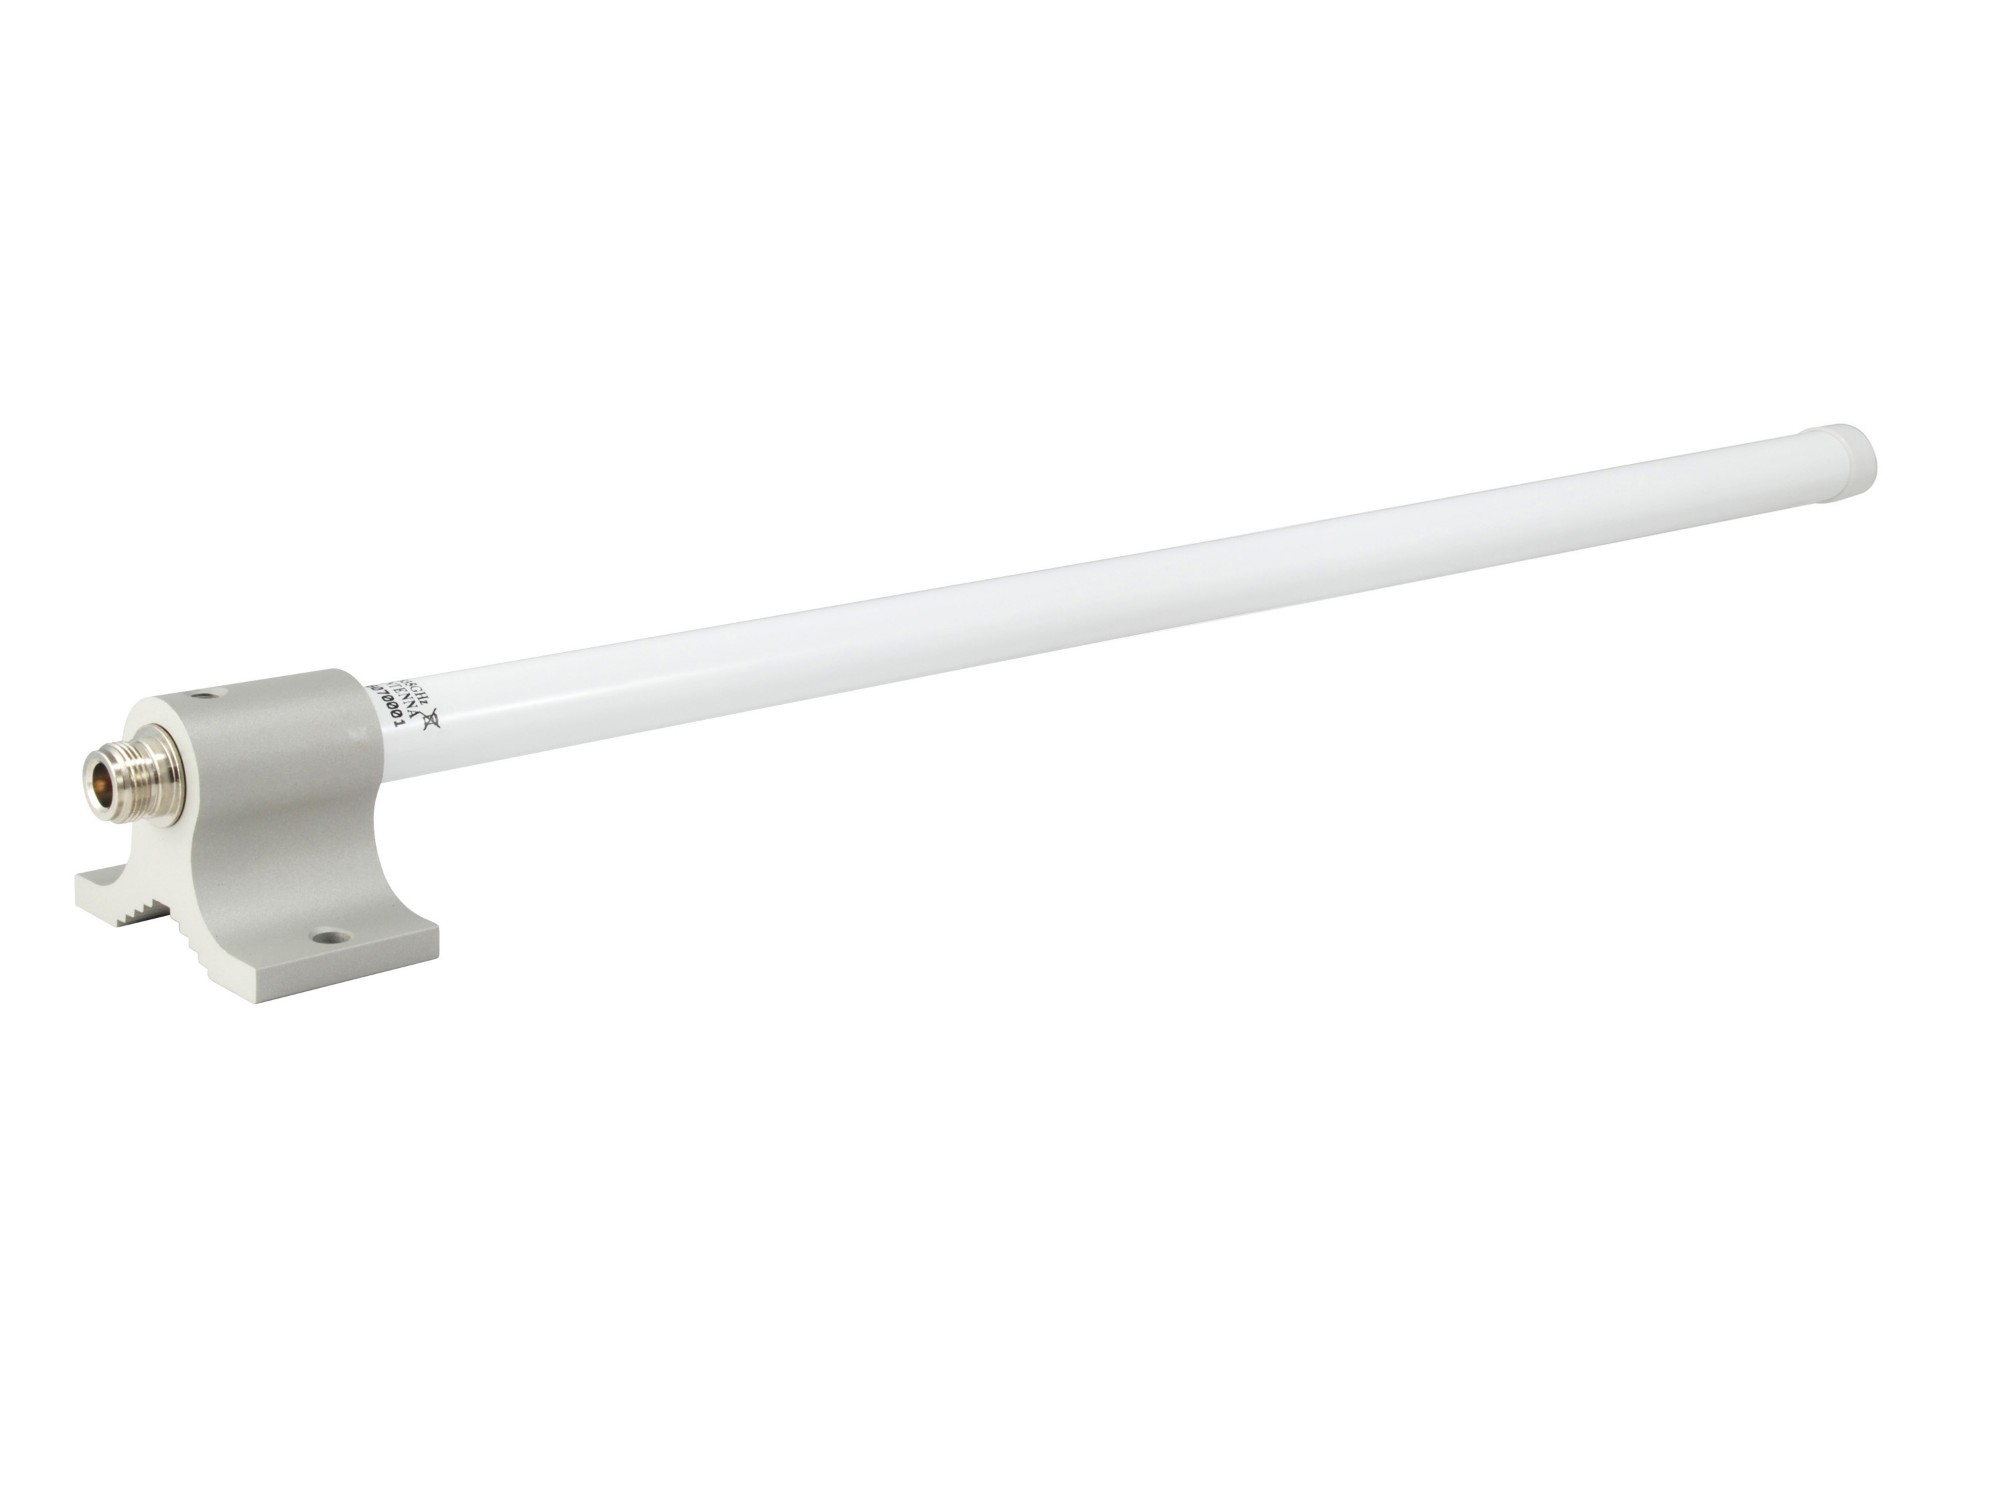 Photos - Antenna for Router LevelOne 12dBi 5GHz Omnidirectional Antenna, Indoor/Outdoor OAN-4121 